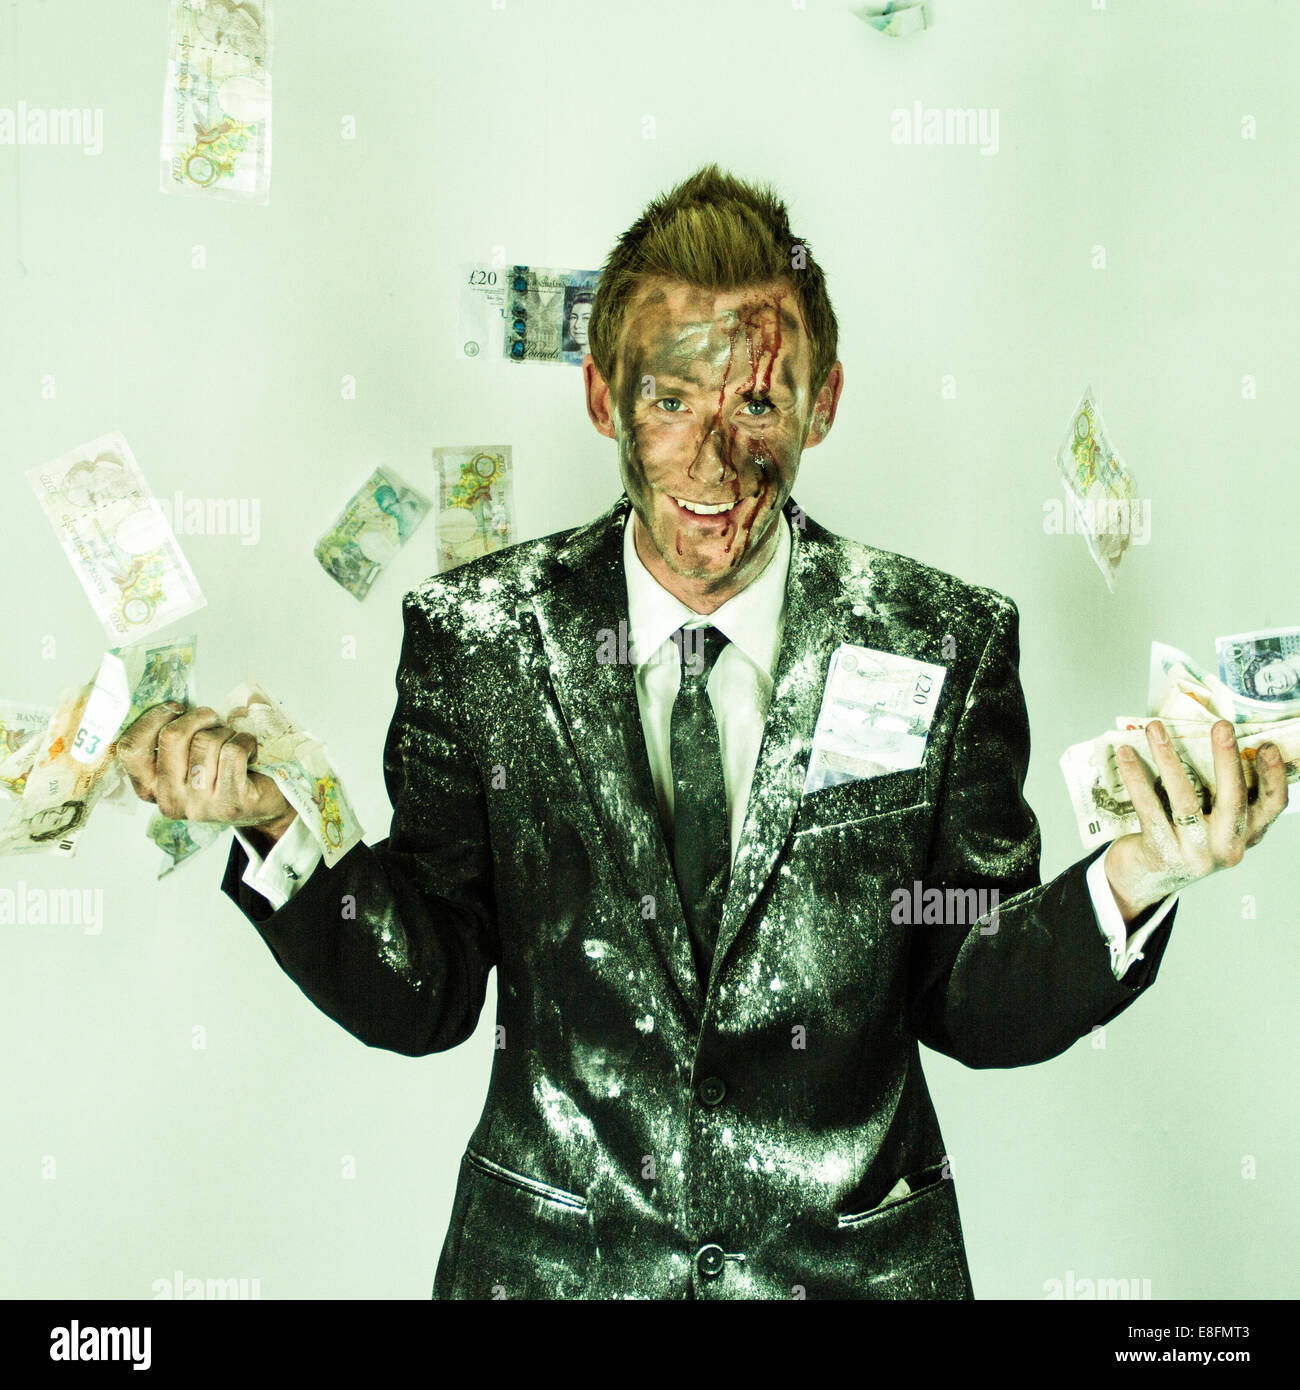 Bloodied man in a dirty suit throwing money in the air Stock Photo